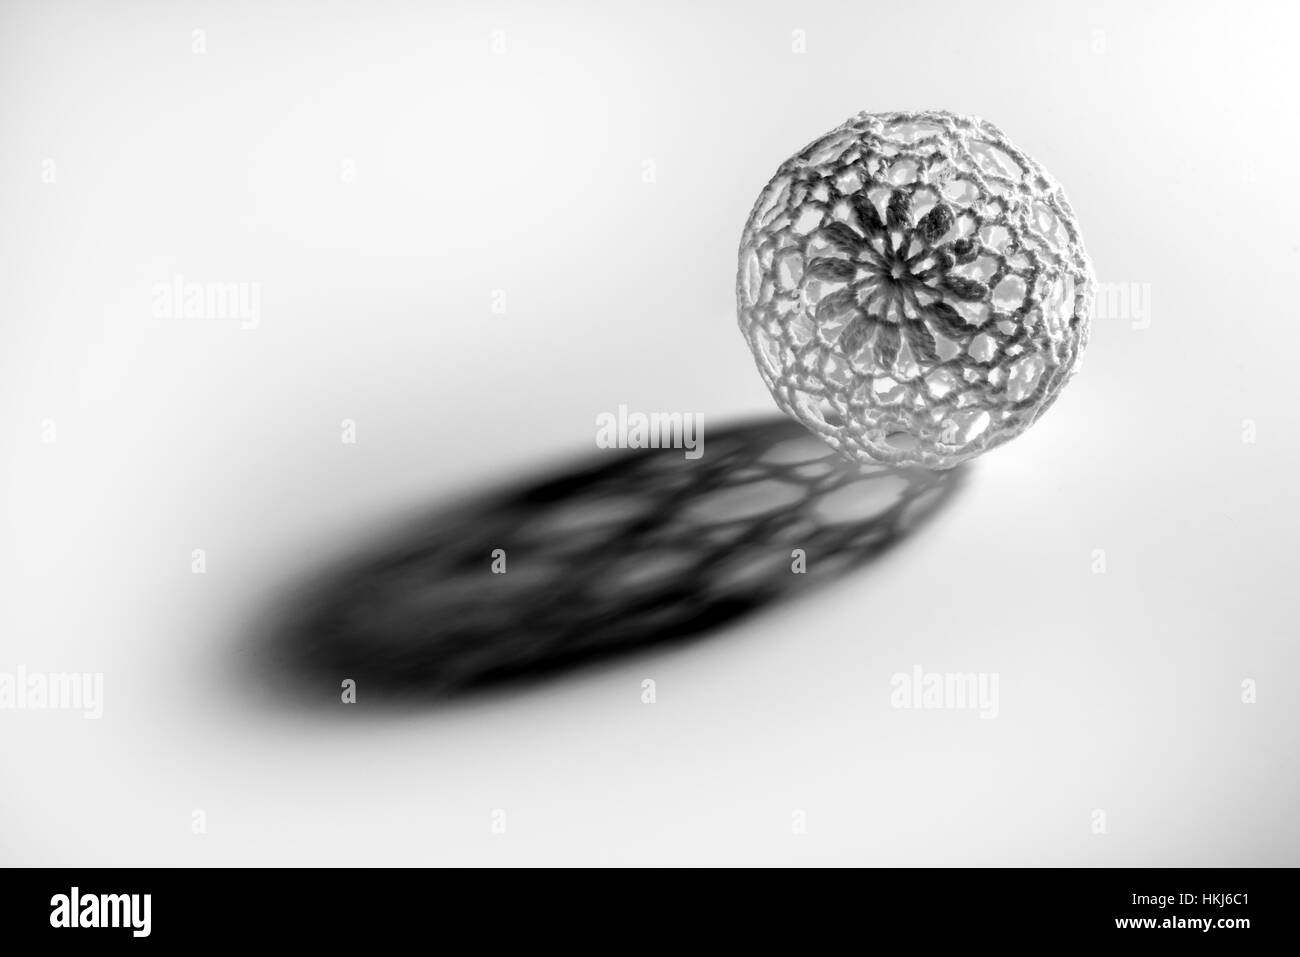 Single openwork sphere ball casting long shadow isolated on white background Stock Photo